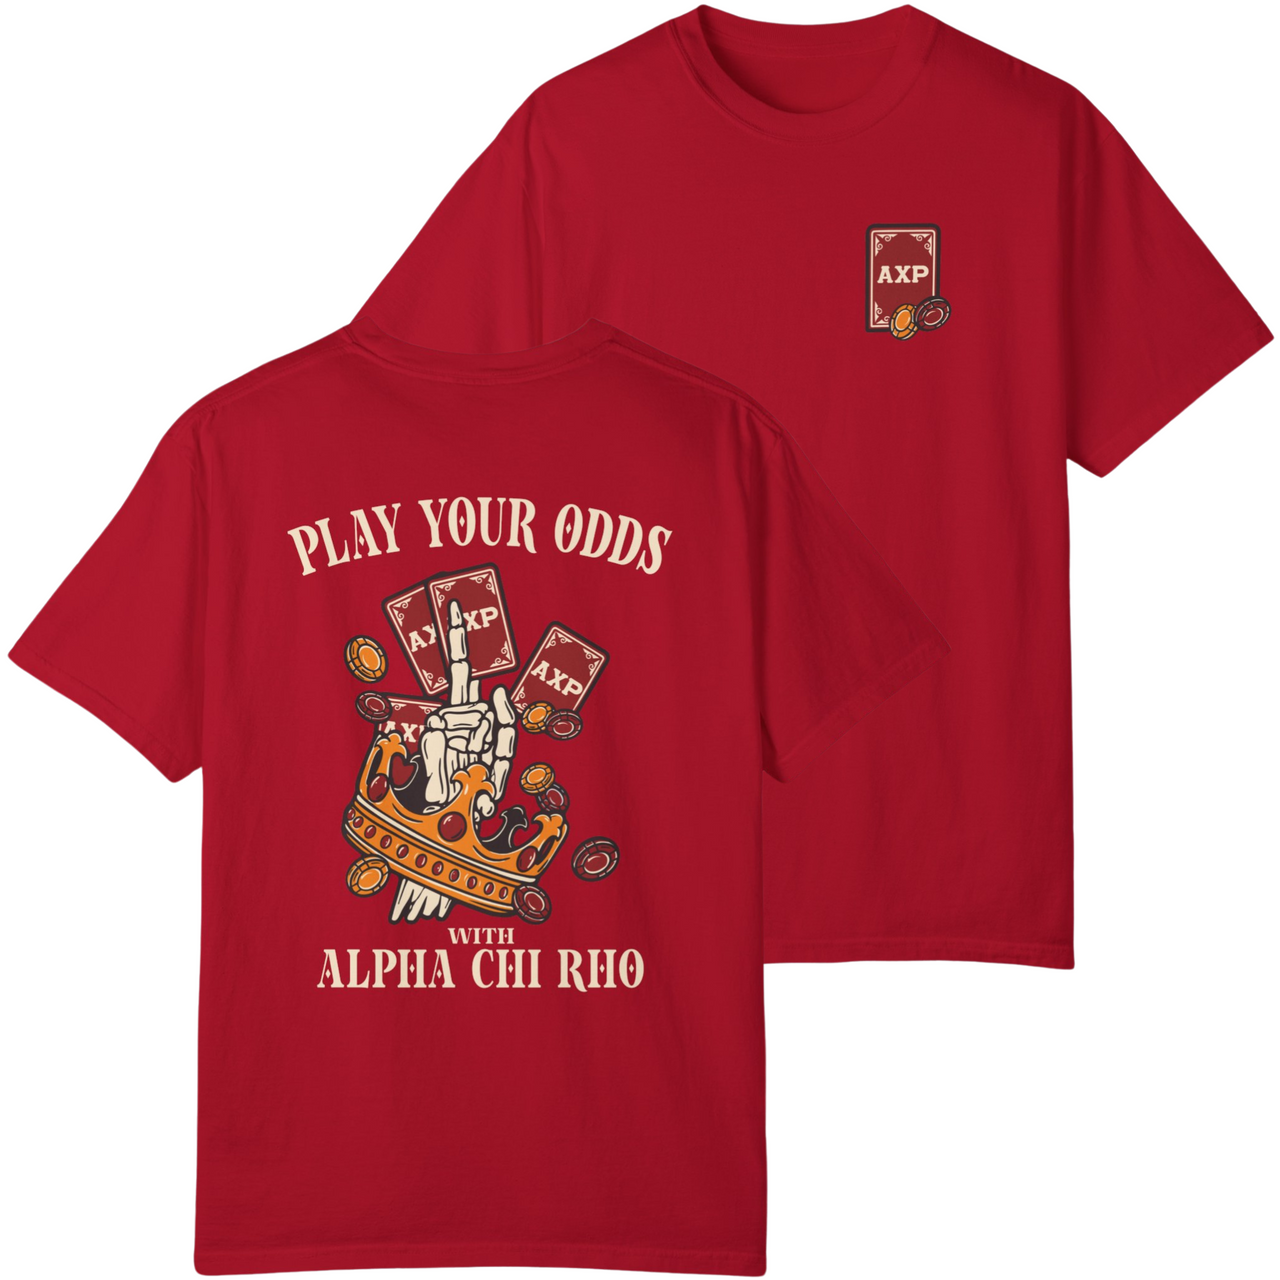 Alpha Chi Rho Graphic T-Shirt | Play Your Odds